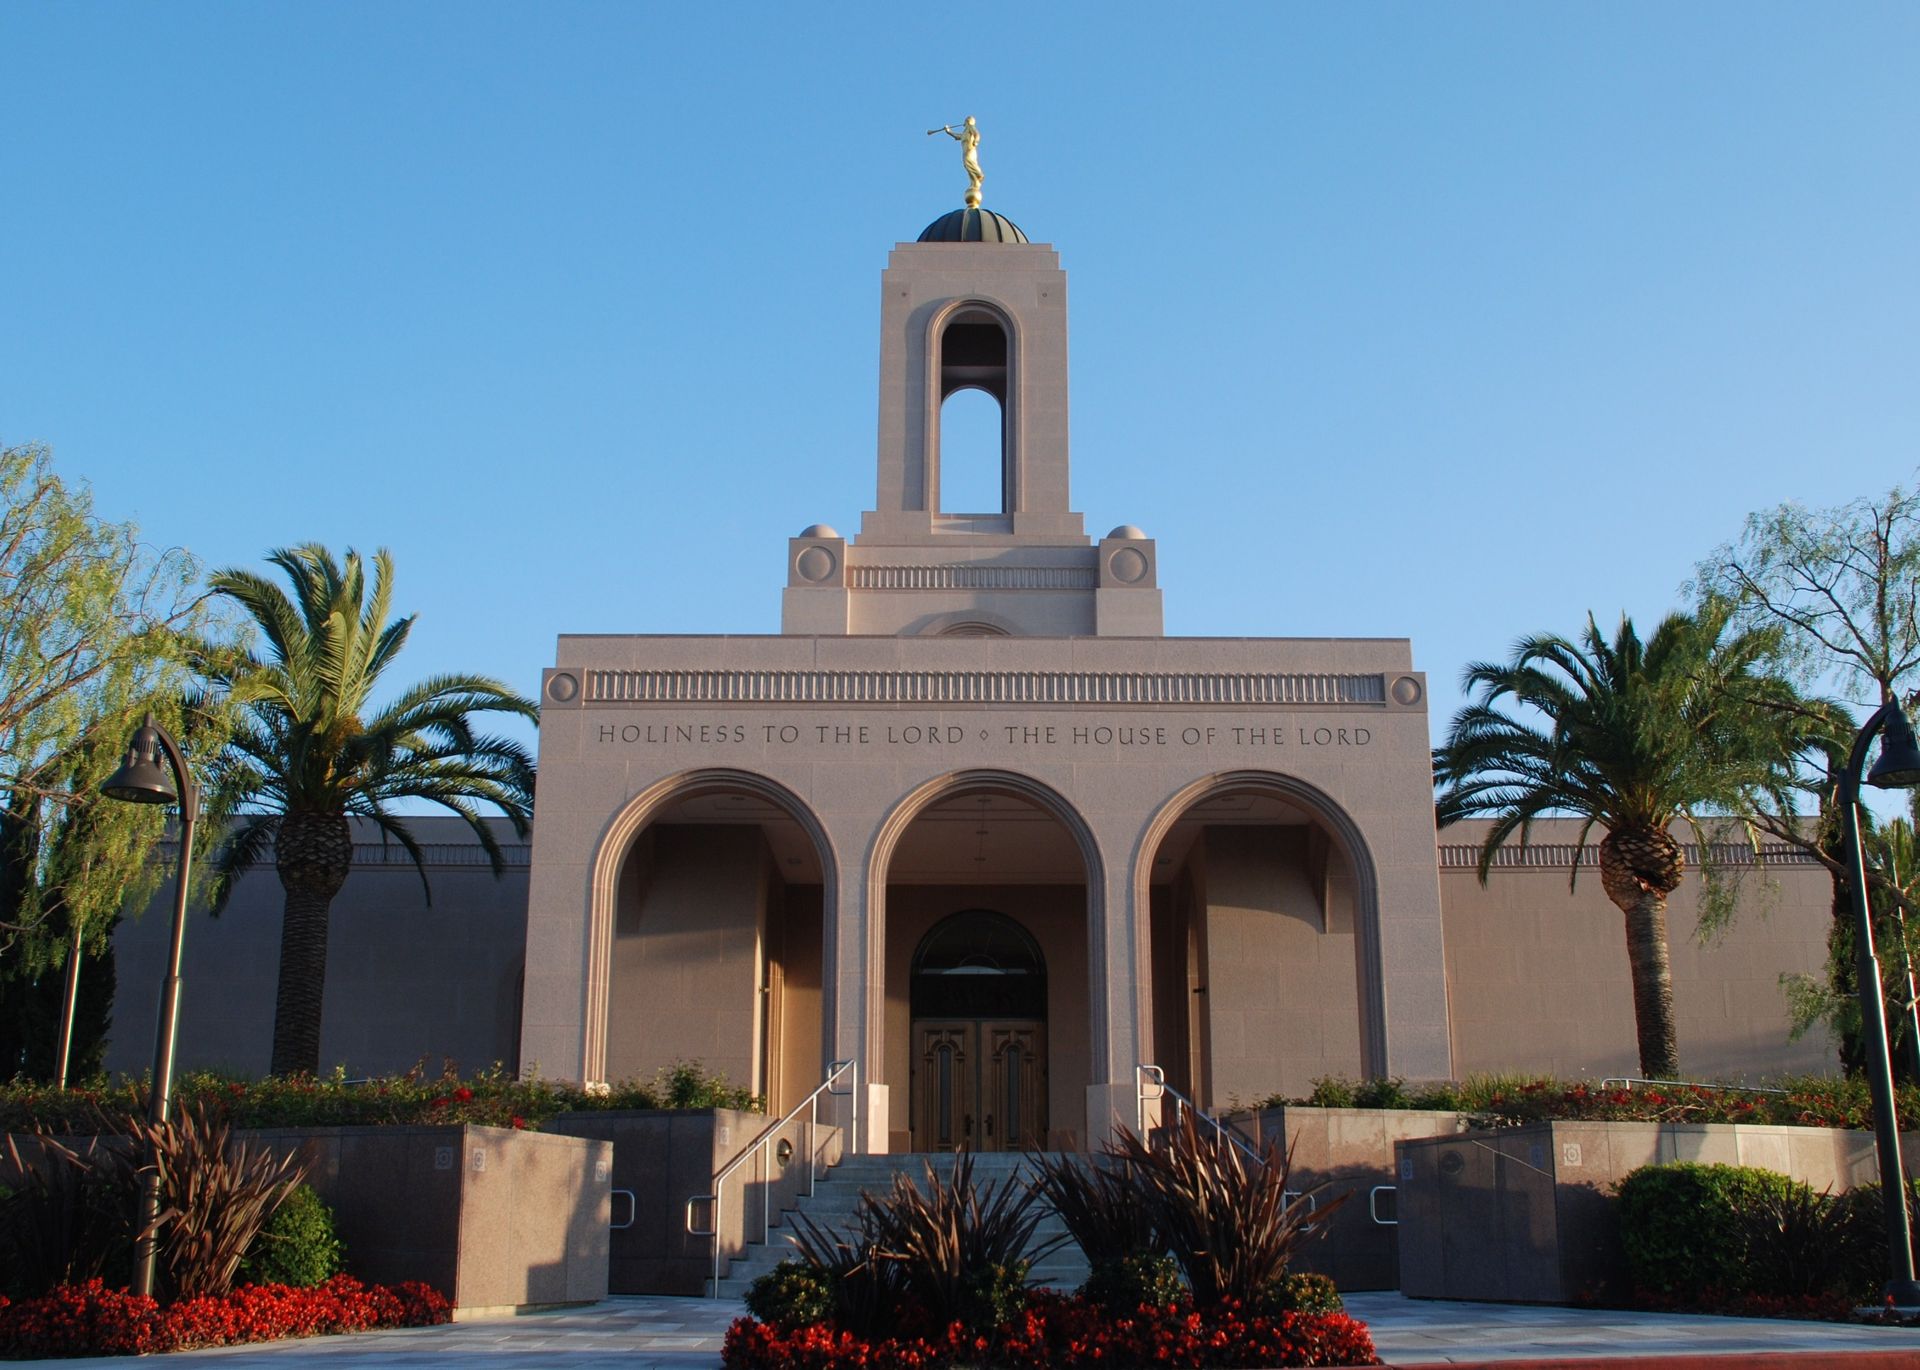 The Newport Beach California Temple engraving, “Holiness to the Lord: The House of the Lord,” including the entrance and scenery.